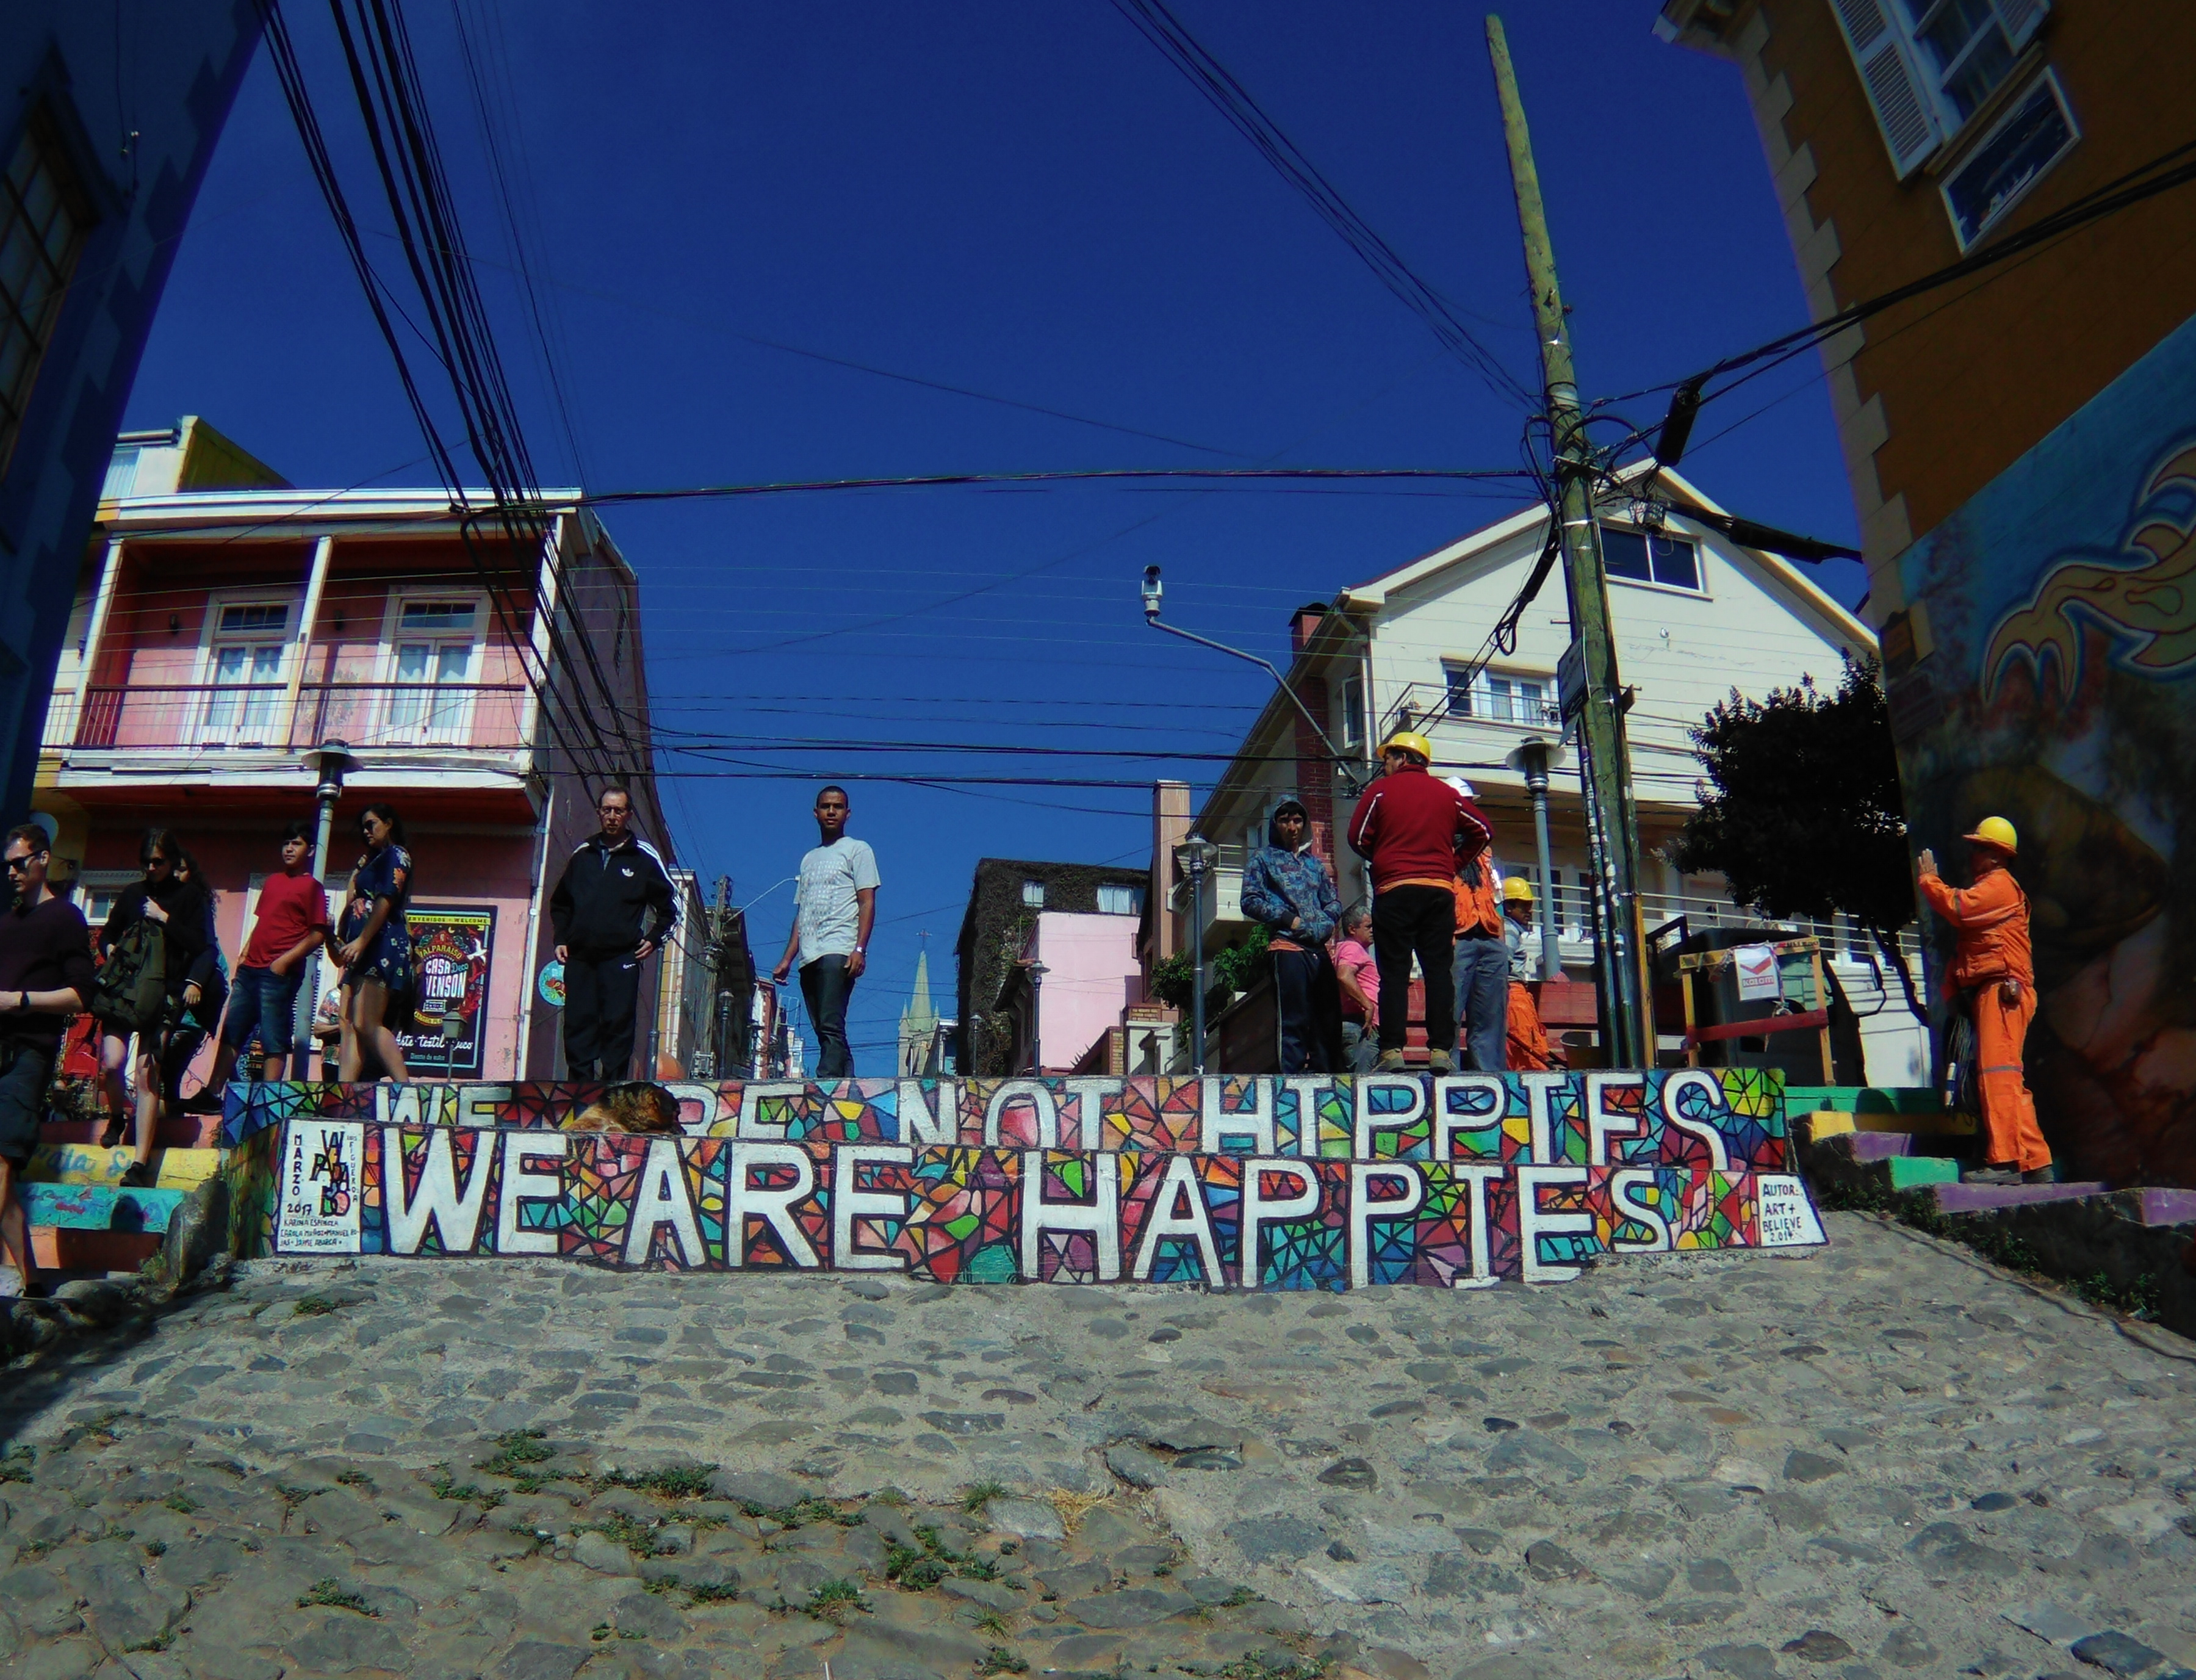 Mural on steps saying "We are not hippies, we are happies"